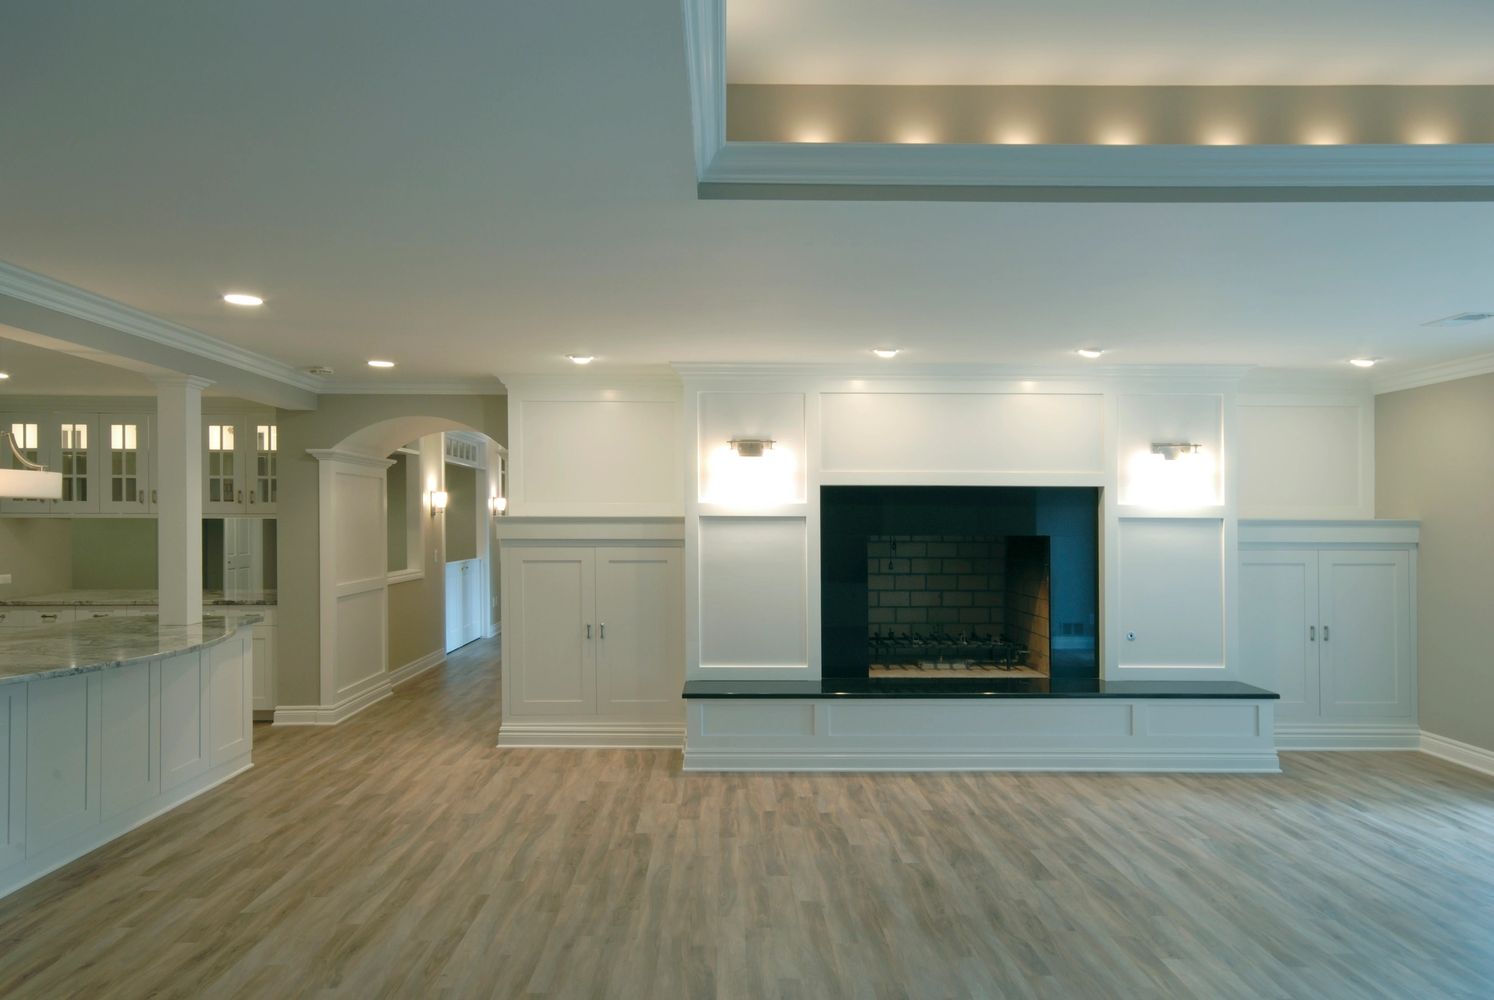 Basement Remodeling Questions & Answers from Starr